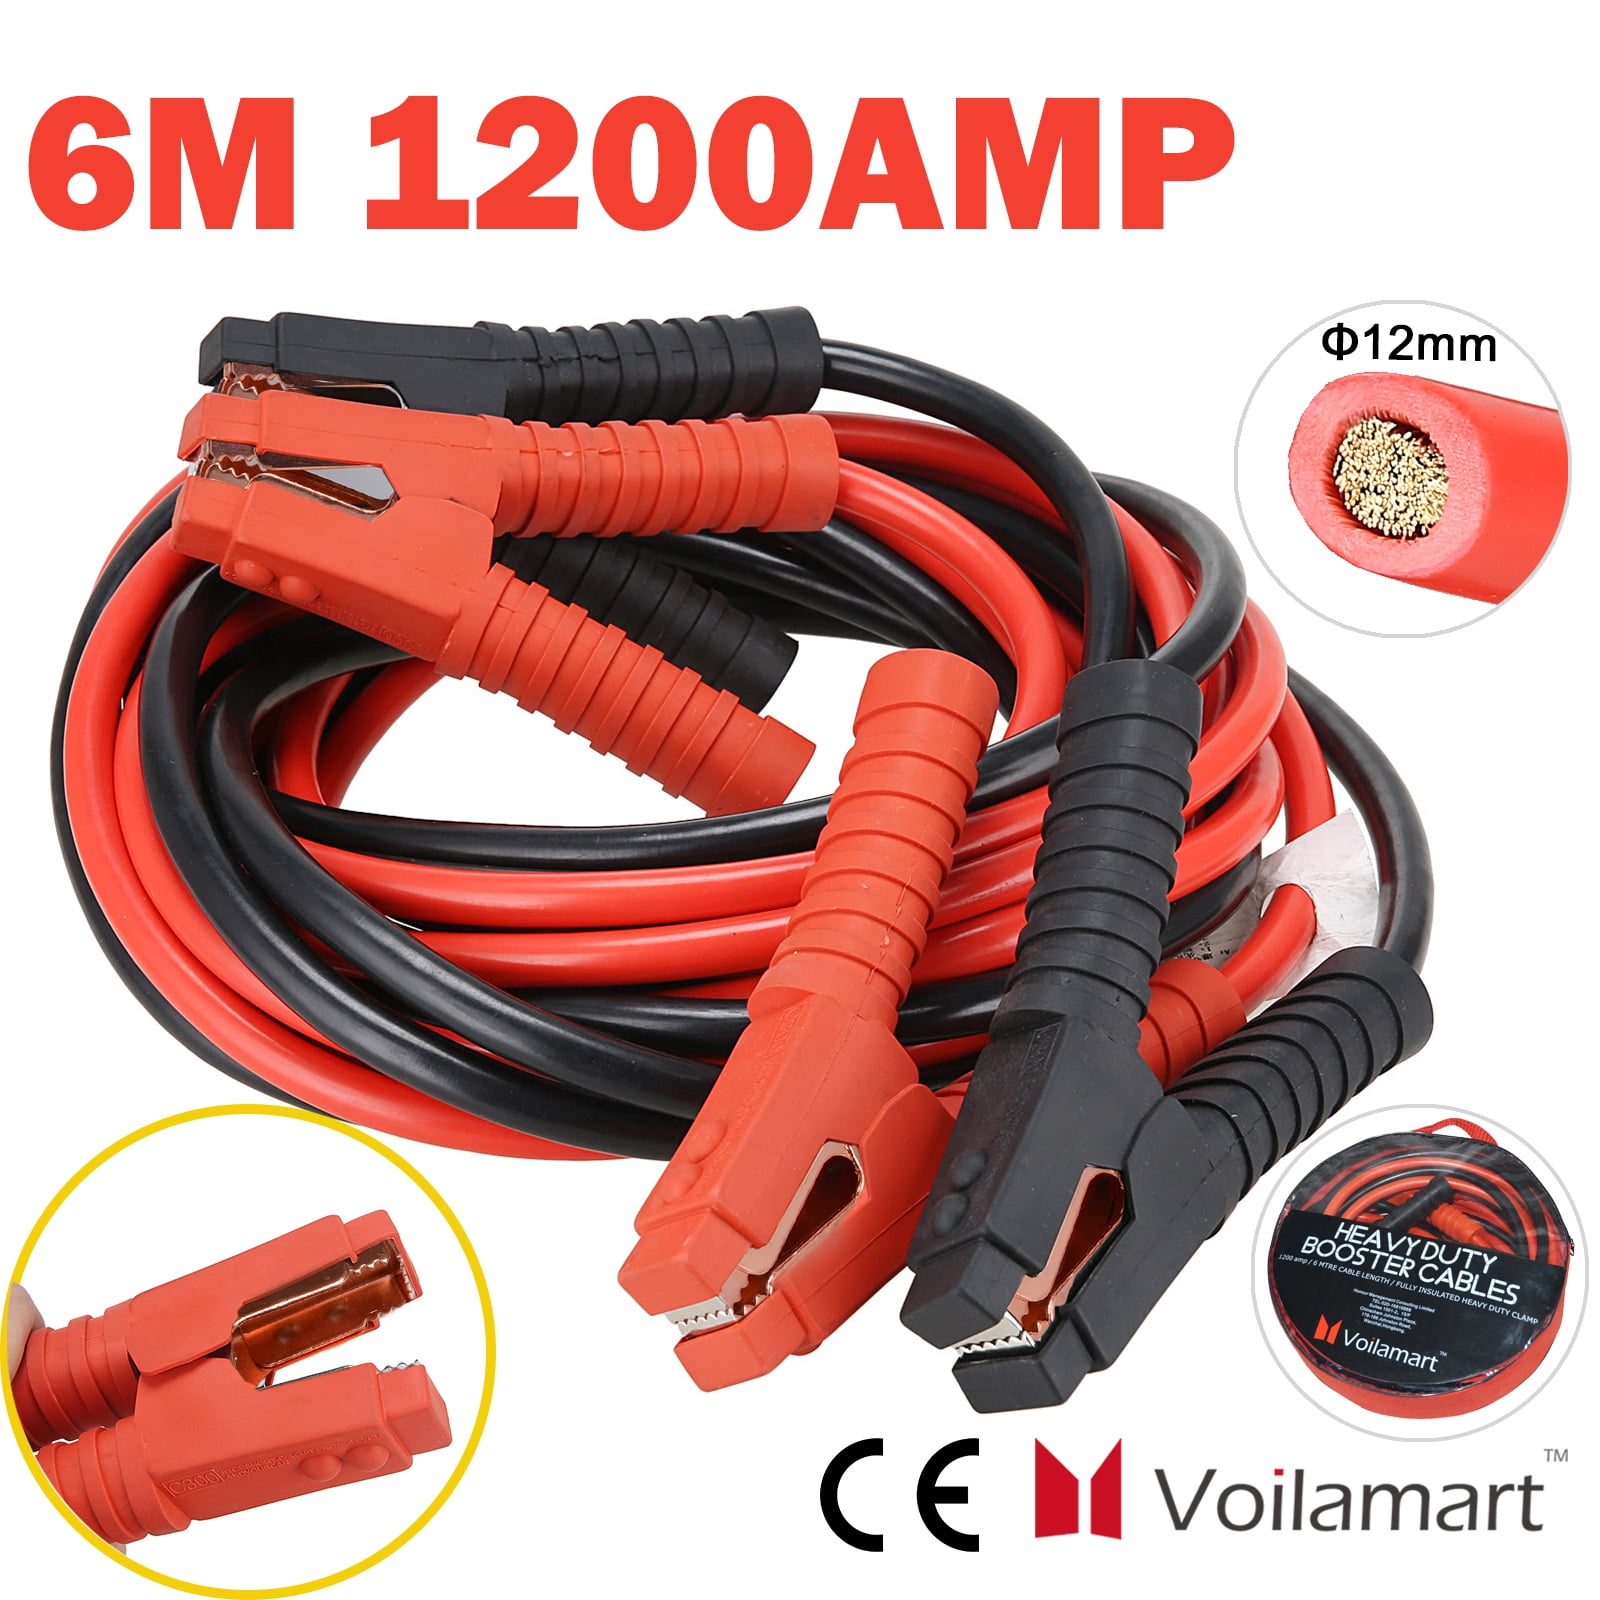 BOOSTER CABLES 6M 900 AMP PROFESSIONAL JUMP LEADS HEAVY DUTY START CAR VAN LONG 